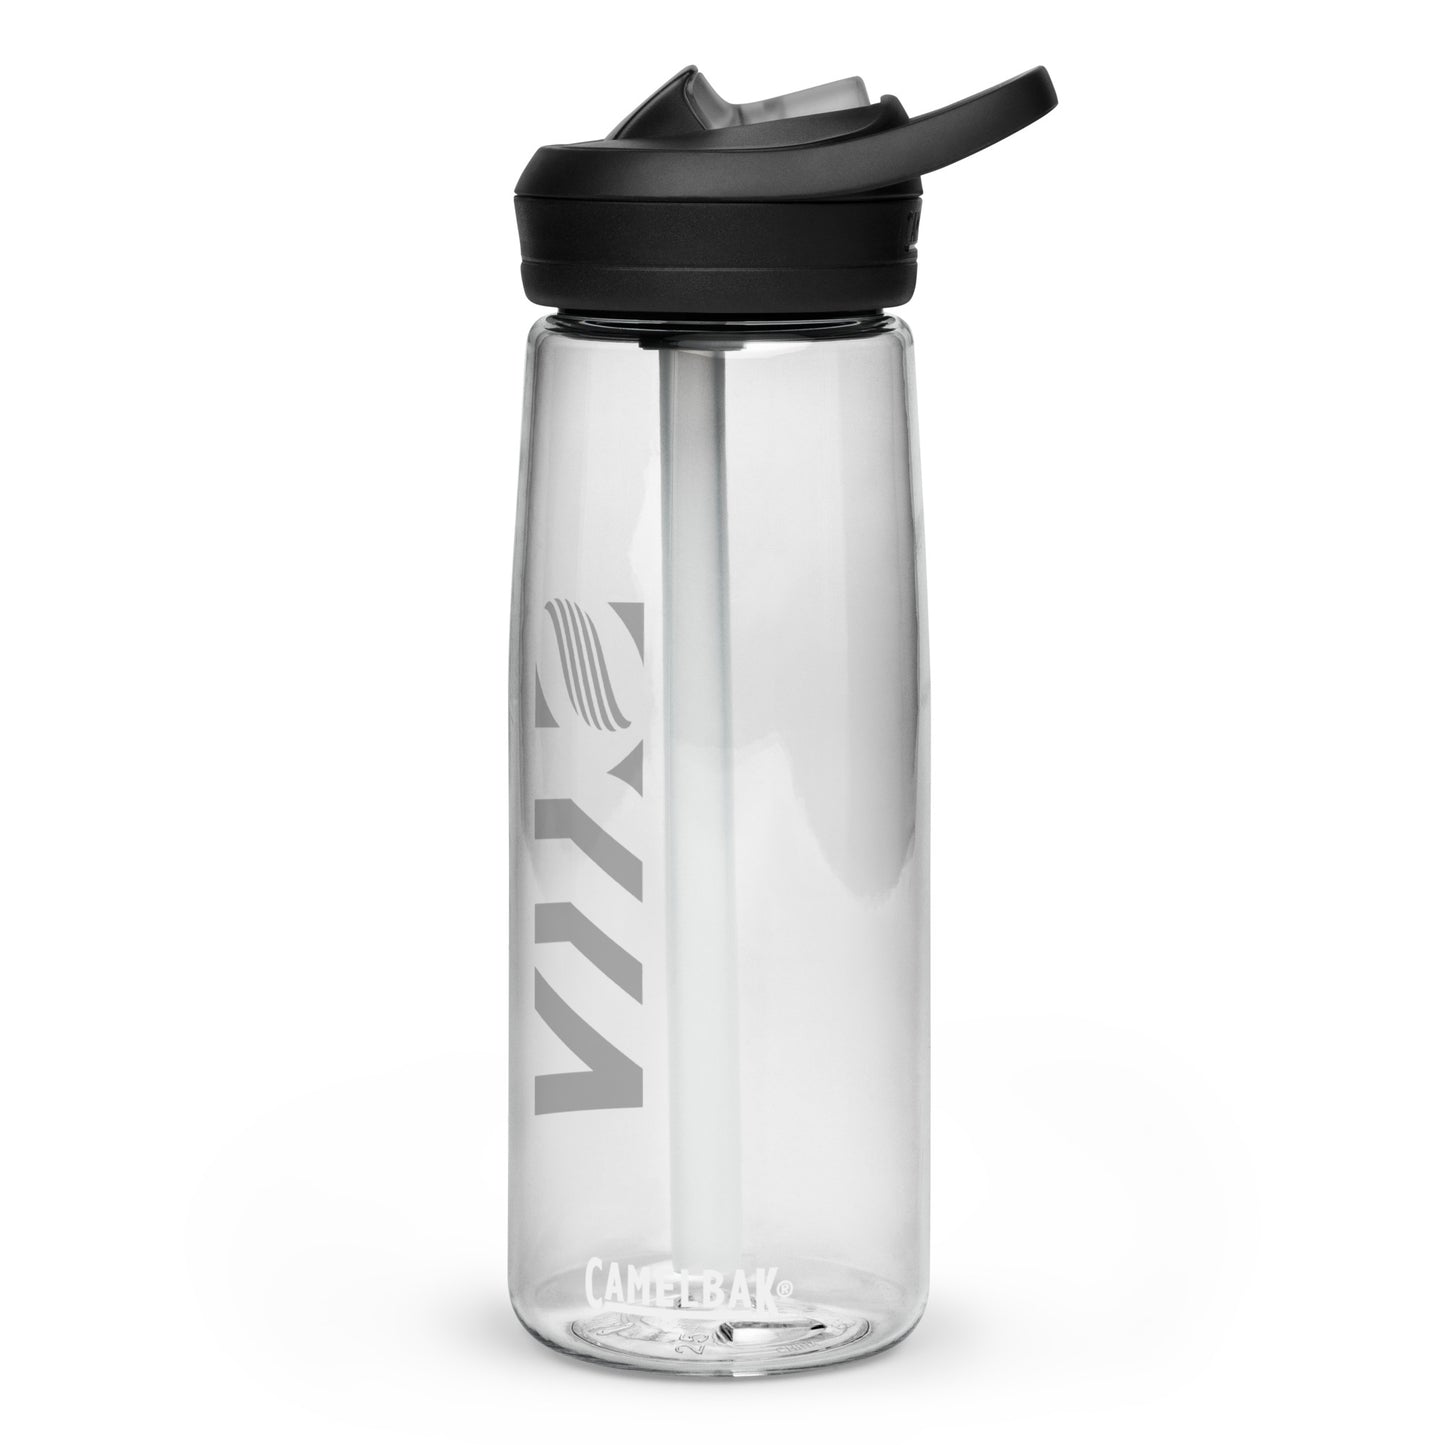 NYYS Sports Clear Water Bottle